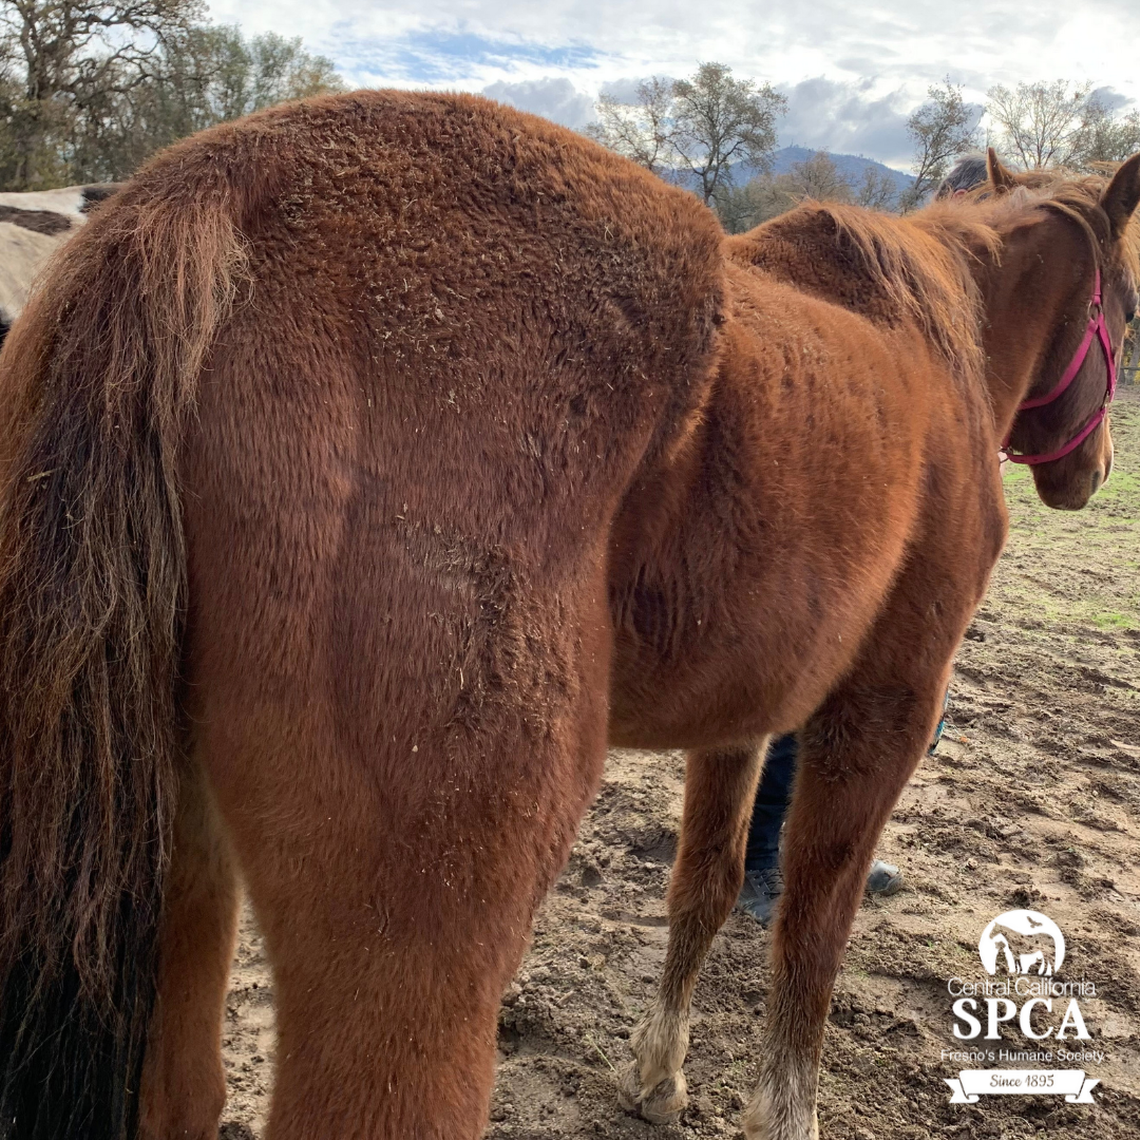 Animal rescue officials say they seized ten horses after “failed attempts” to convince the owner to work with the agency to improve conditions for the animals.